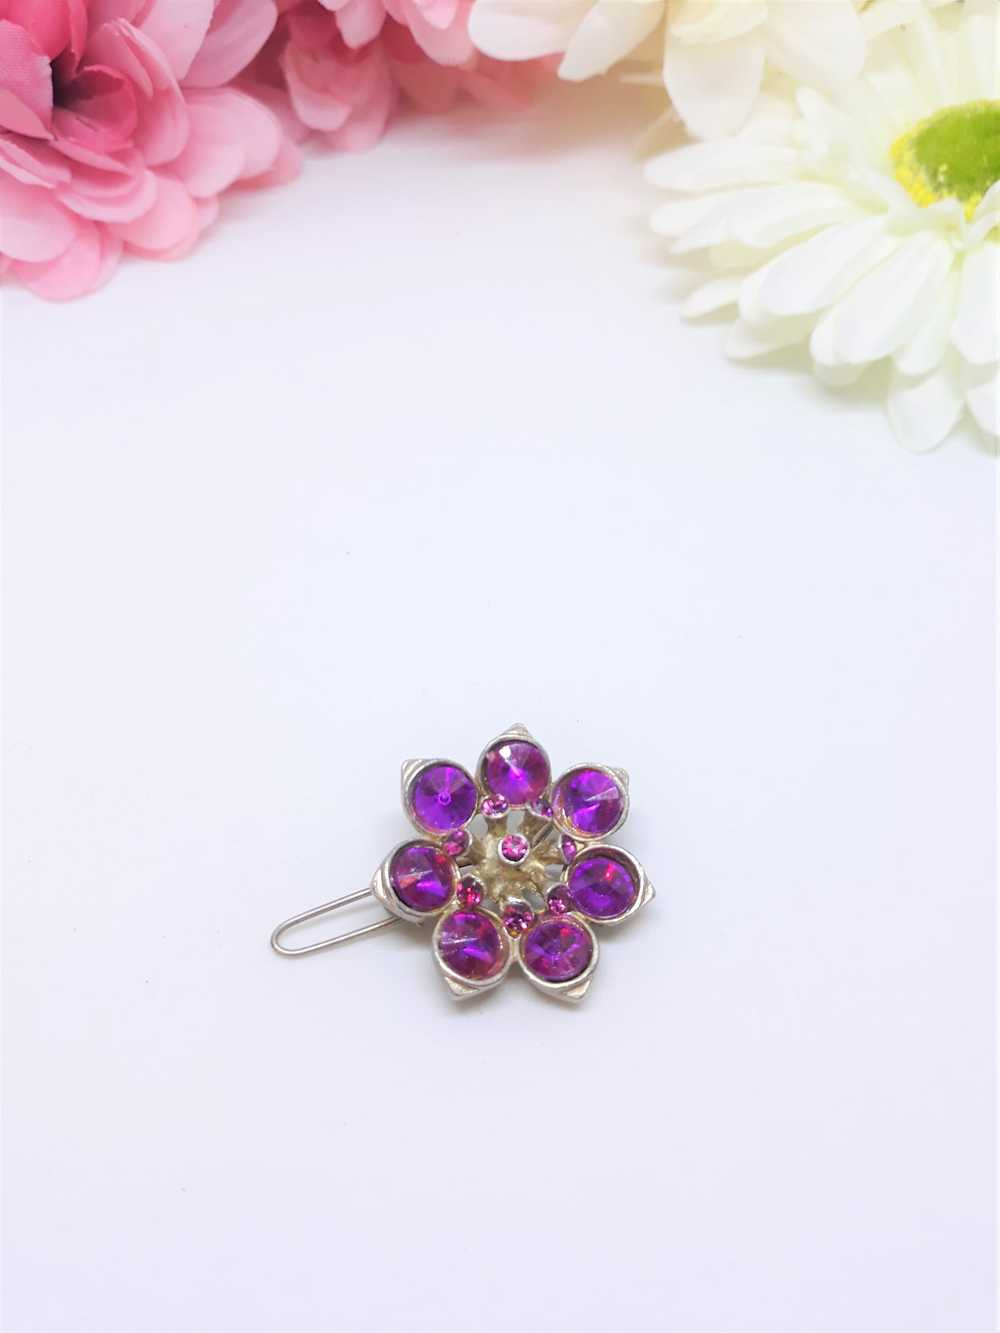 Gorgeous 1950s Purple Floral Hair Pin - image 6